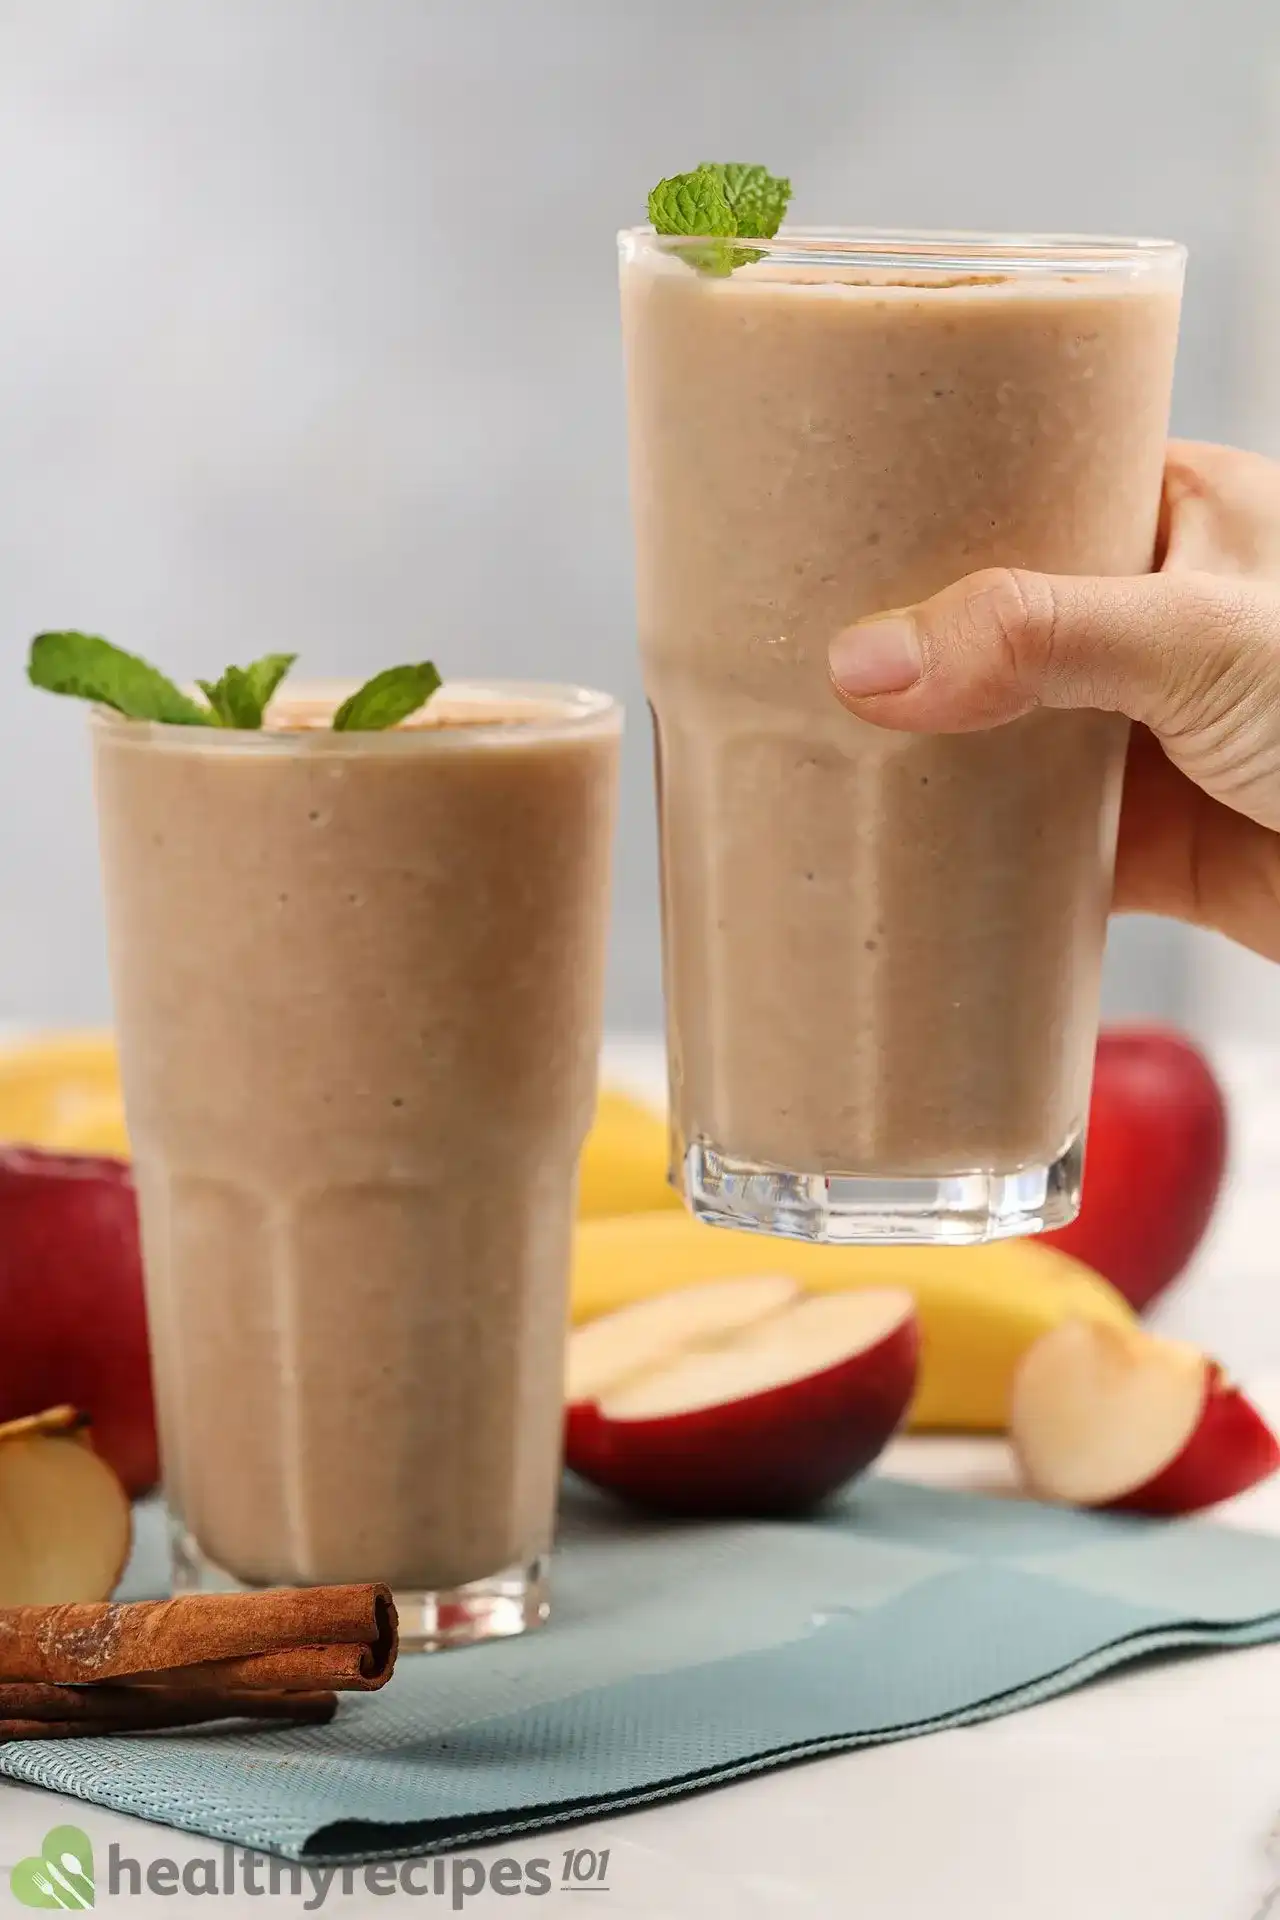 Apple Banana Smoothie Recipe: A Healthy and Filling Beverage